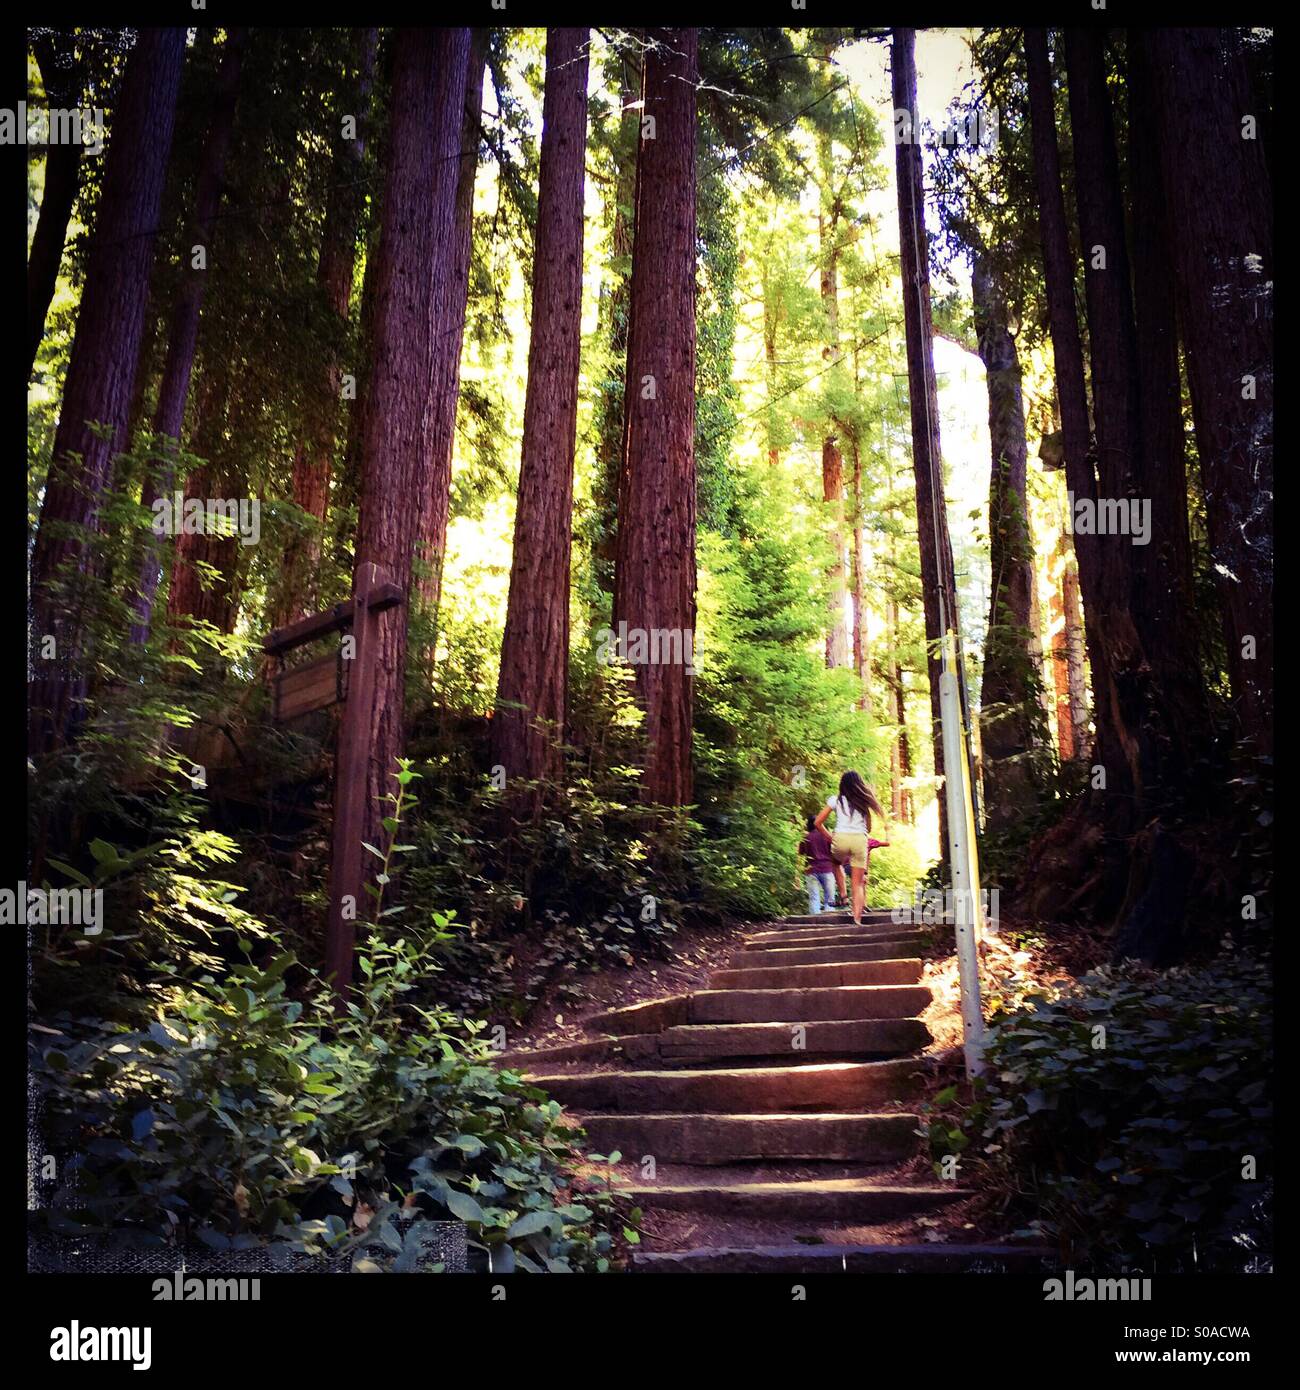 A ten year old girl and her six year old brother walk up stairs on a path in California's Redwoods. Santa Cruz County, California, USA Stock Photo